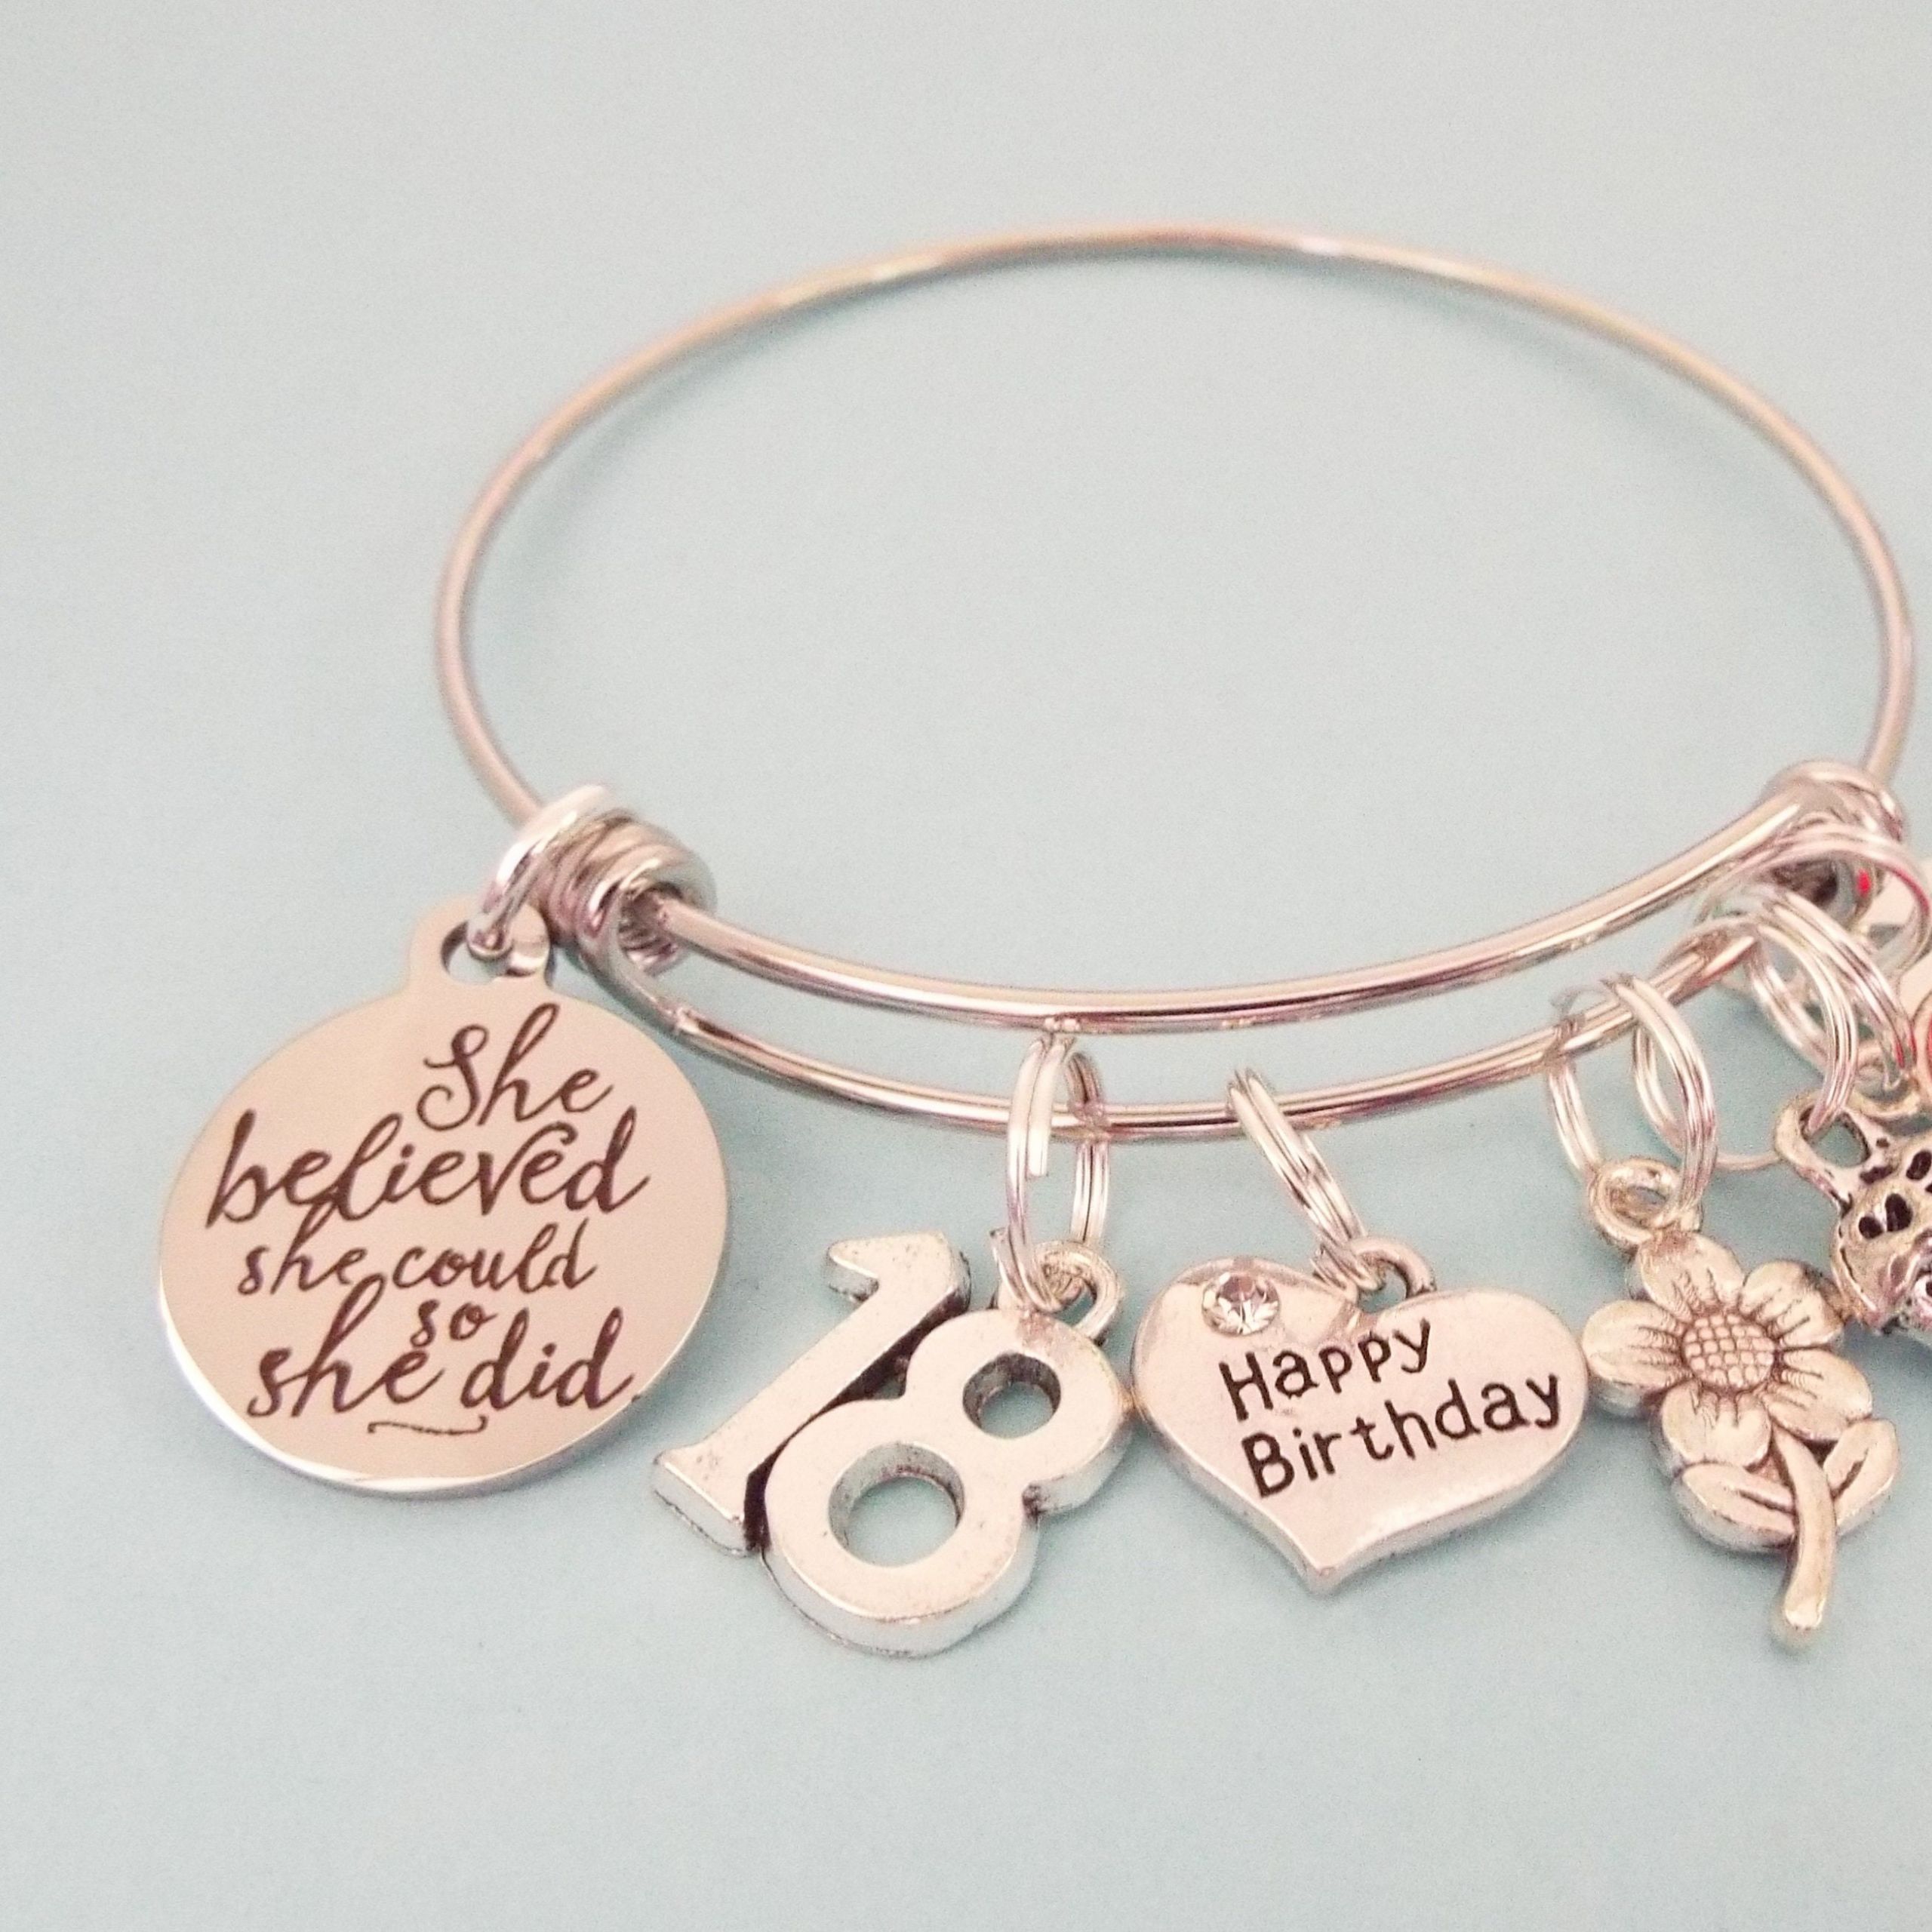 Jewelry Gift Ideas For Girlfriend
 18th Birthday Gift for Girl Personalized Charm Bracelet